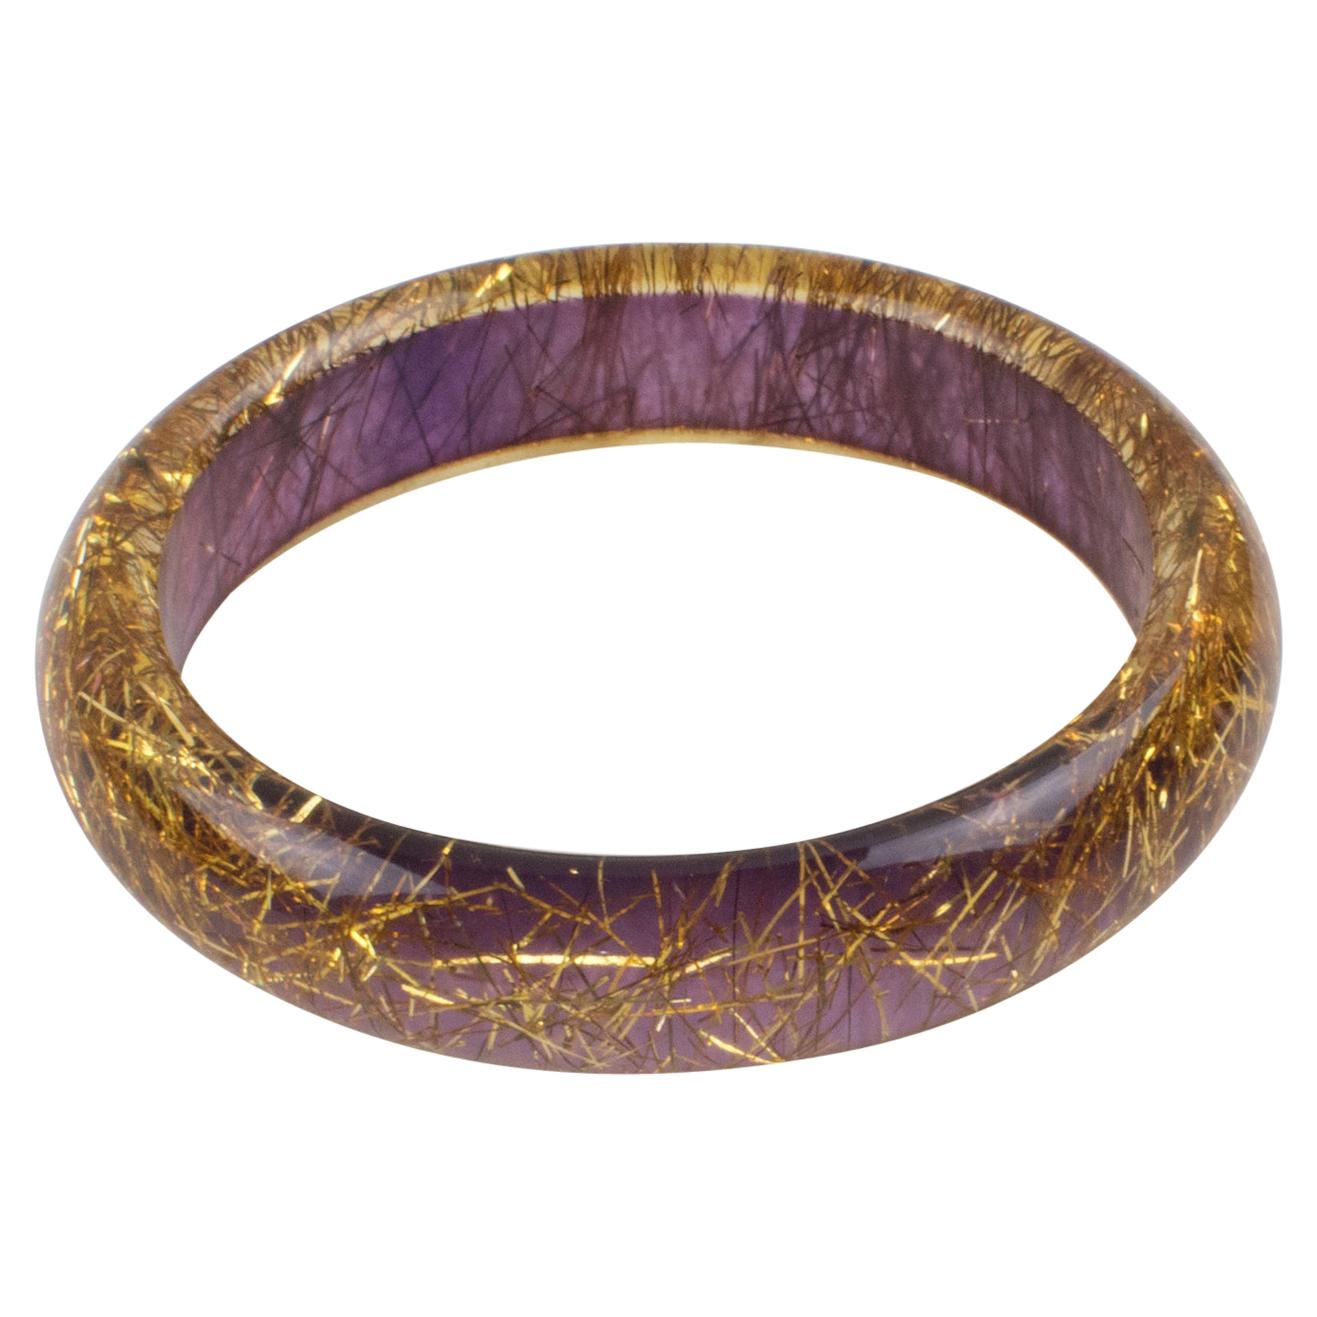 Lucite Bracelet Bangle Gold Metallic Thread Inclusions over Purple Background